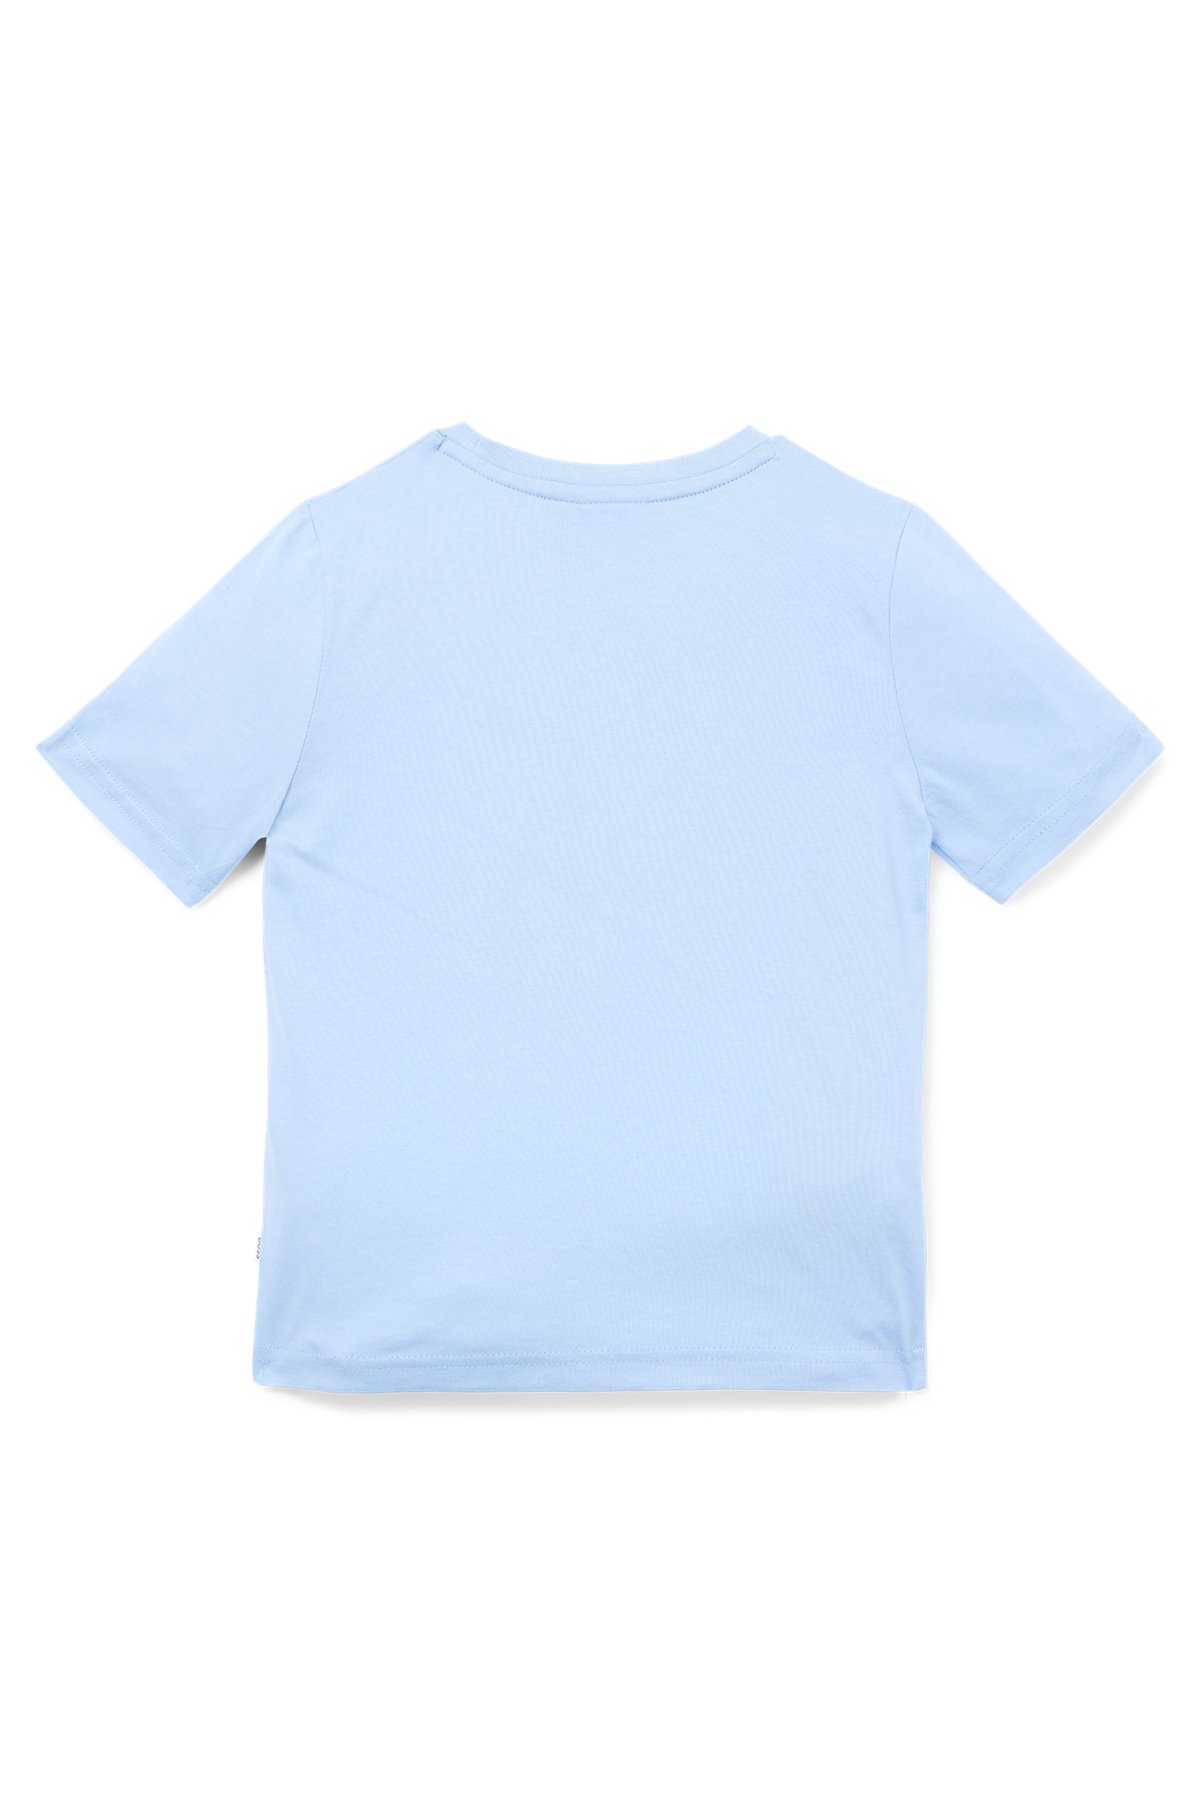 Kids' T-shirt in with logo print, Light Blue